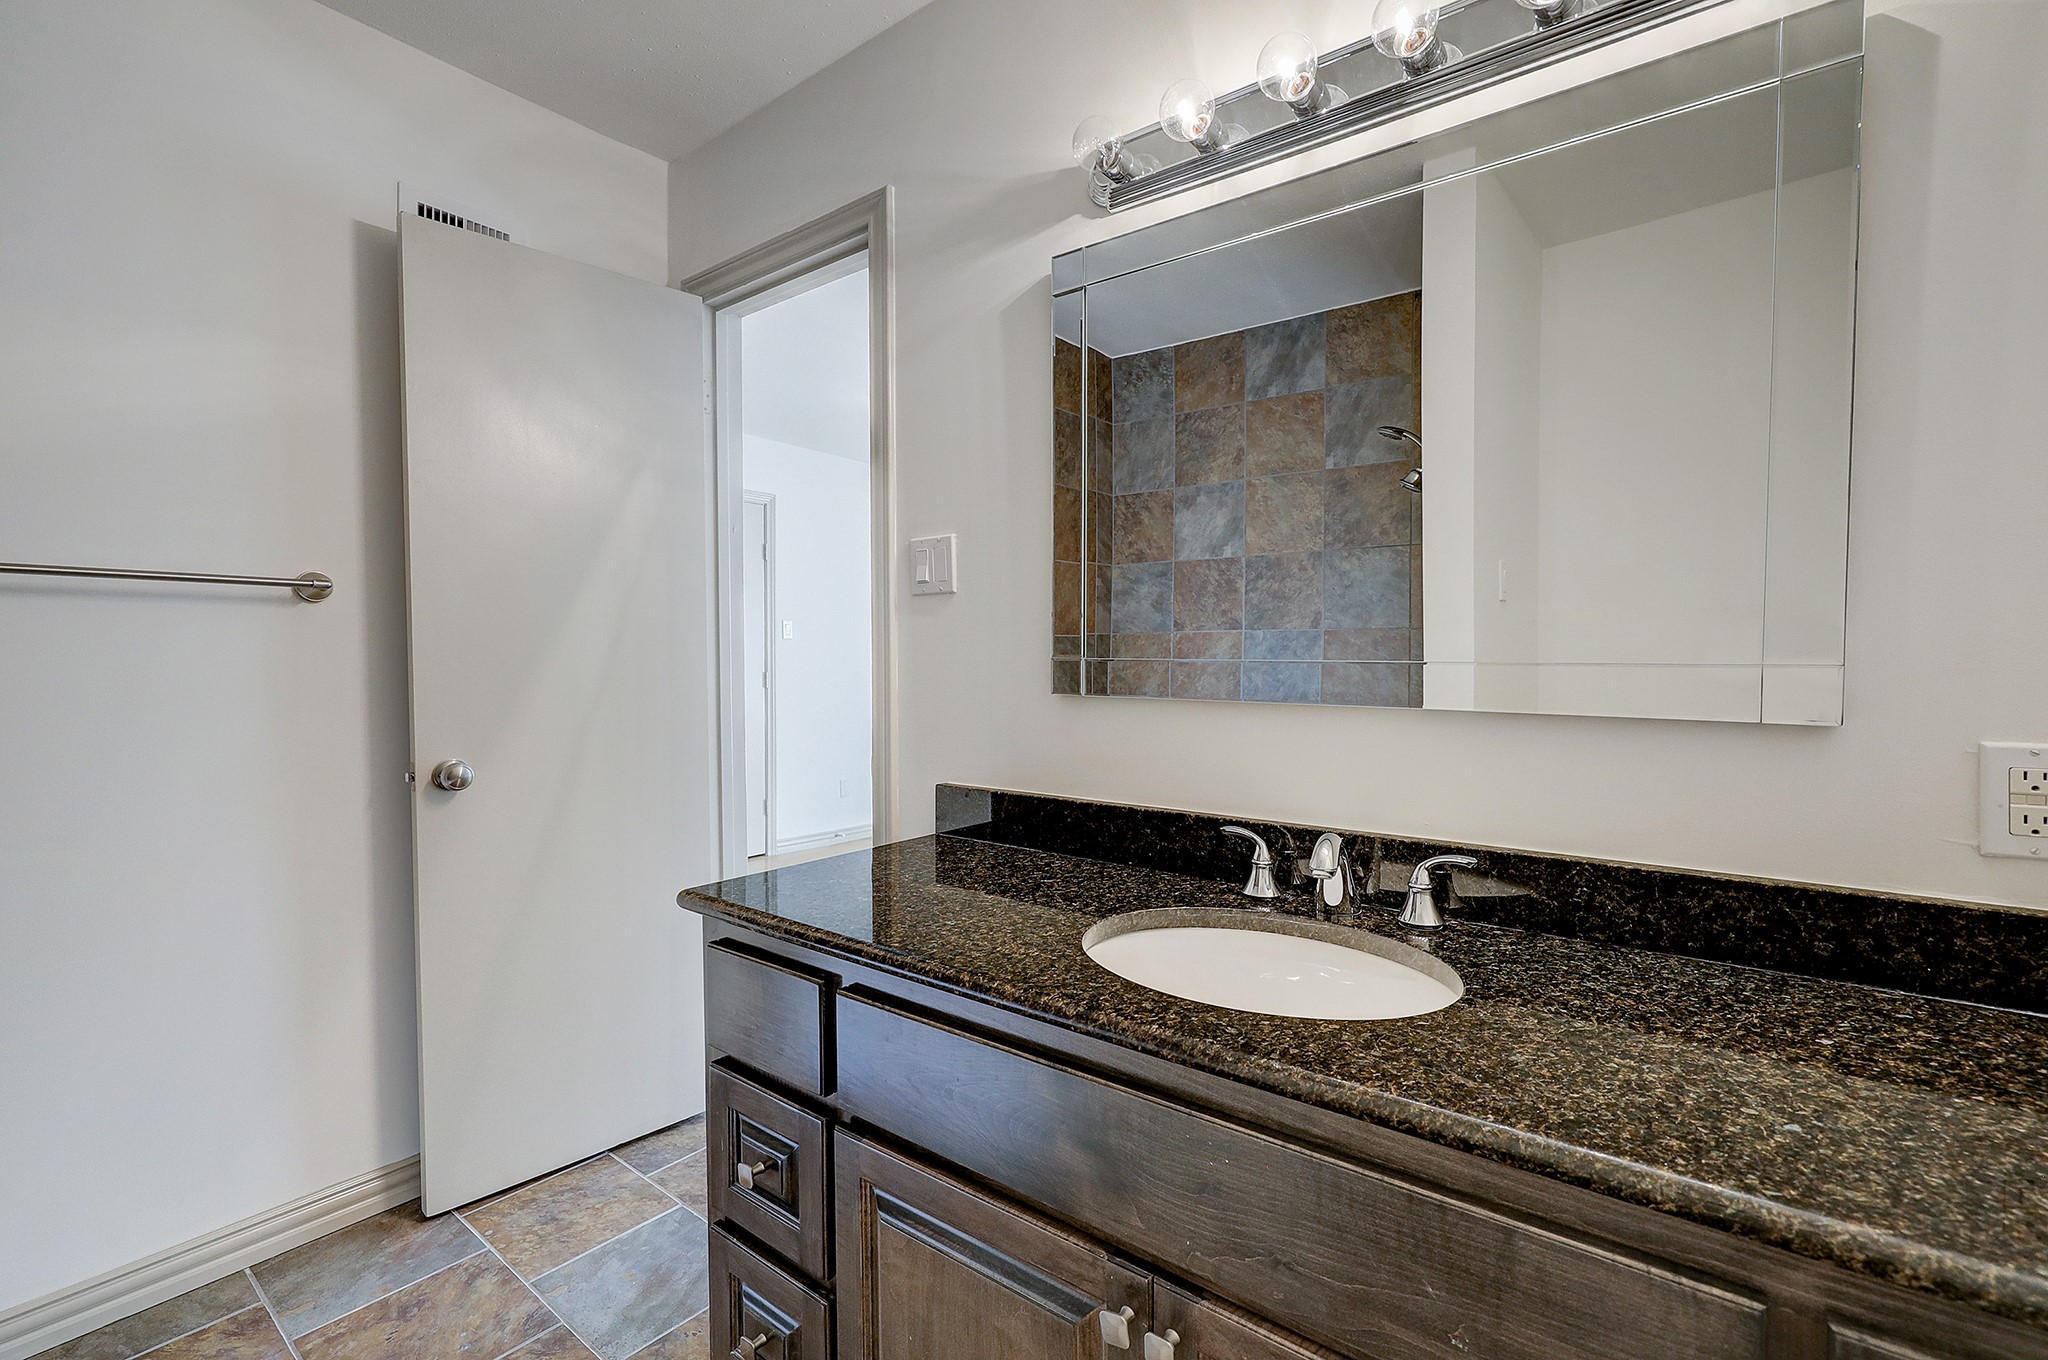 Alternate view of the full bathroom. Dark stained cabinetry, granite countertops with an under-mount sink and chrome plumbing fixtures, complete the space.